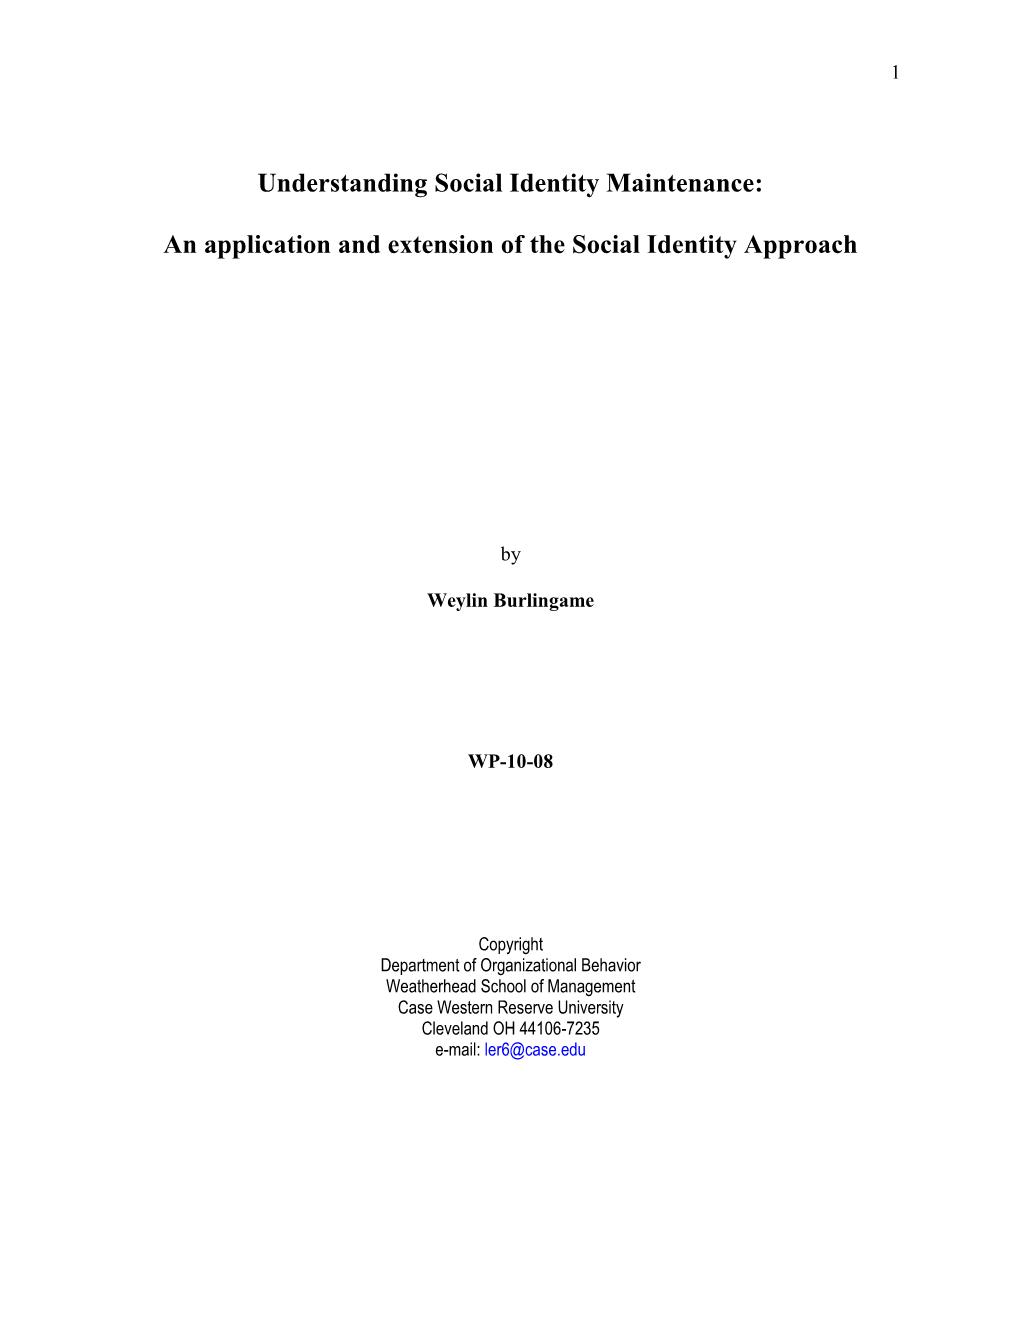 Understanding Social Identity Maintenance: an Application and Extension of the Social Identity